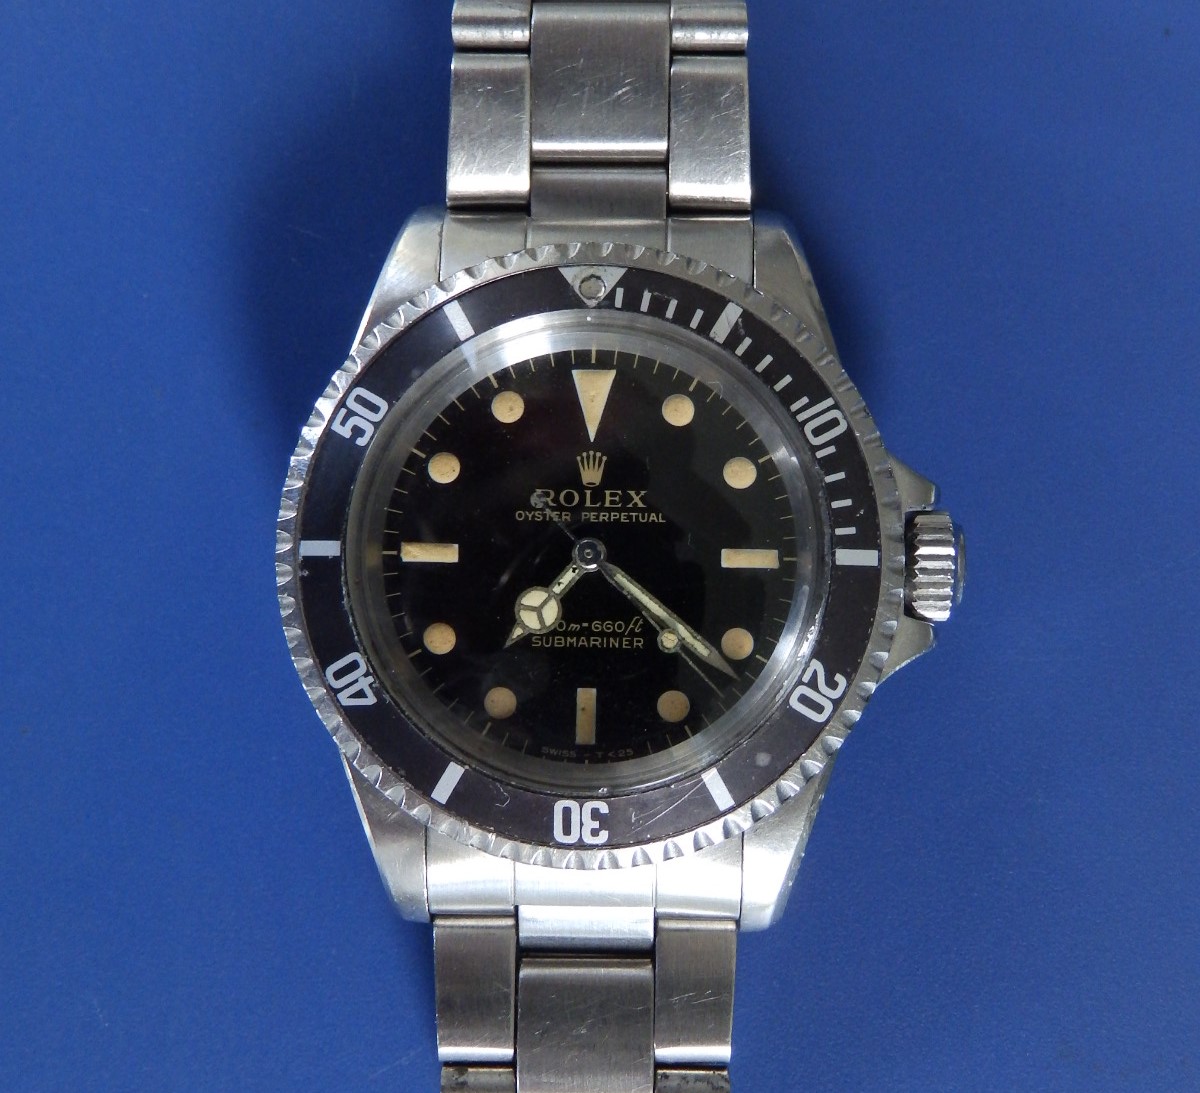 A 1966 Rolex Submariner claimed for a bid of £14,500